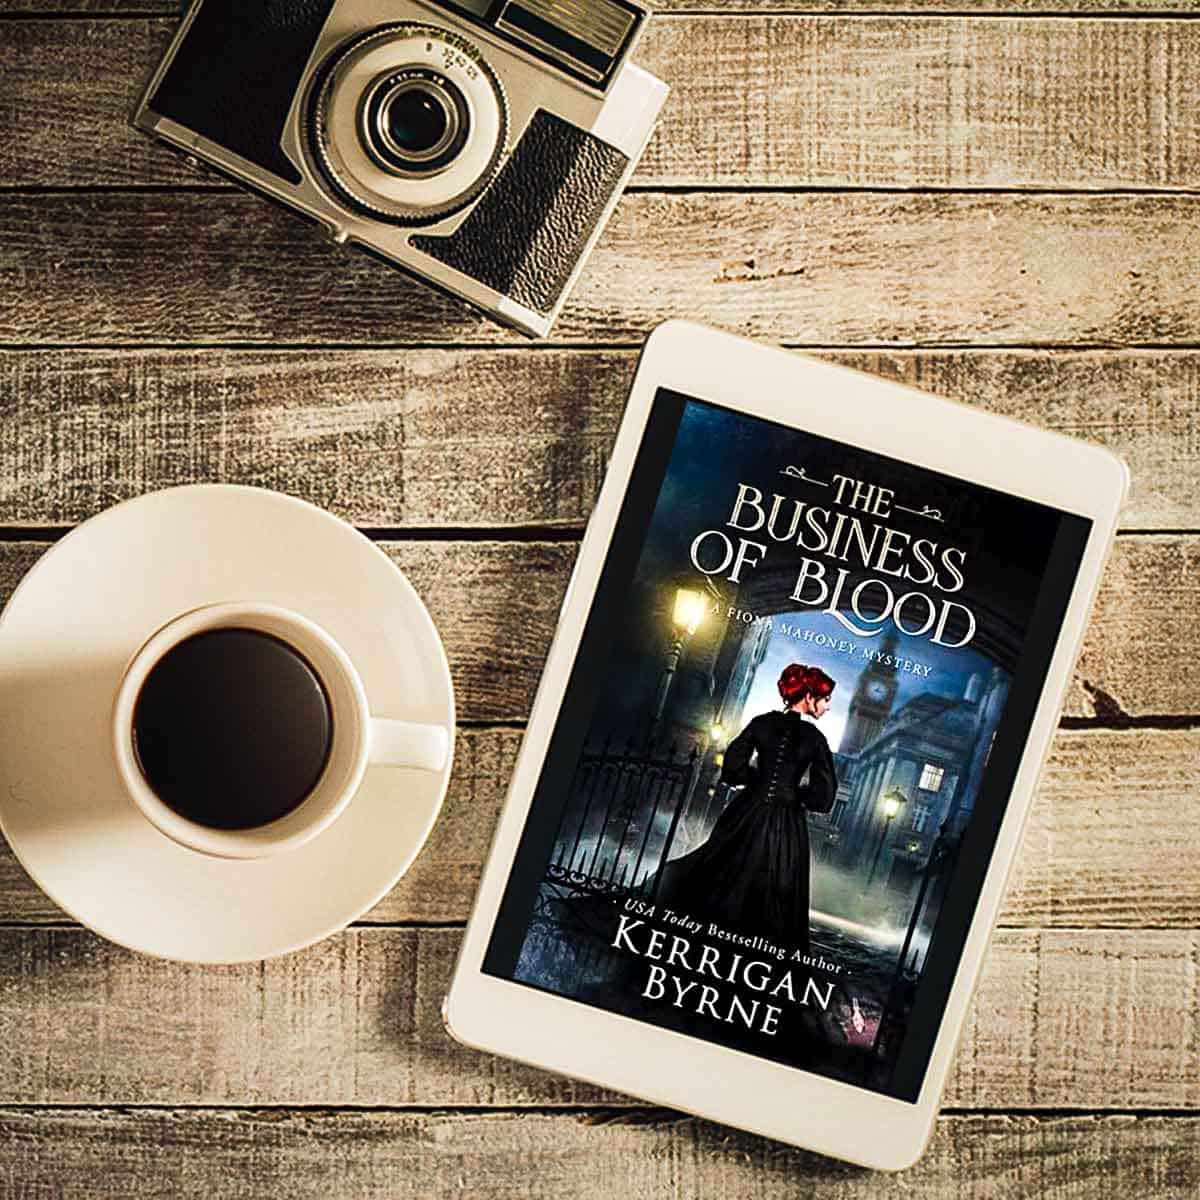 The Business of Blood by Kerrigan Byrne is a murder mystery based on the famous killer, Jack the Ripper, that will have you riveted until the end!